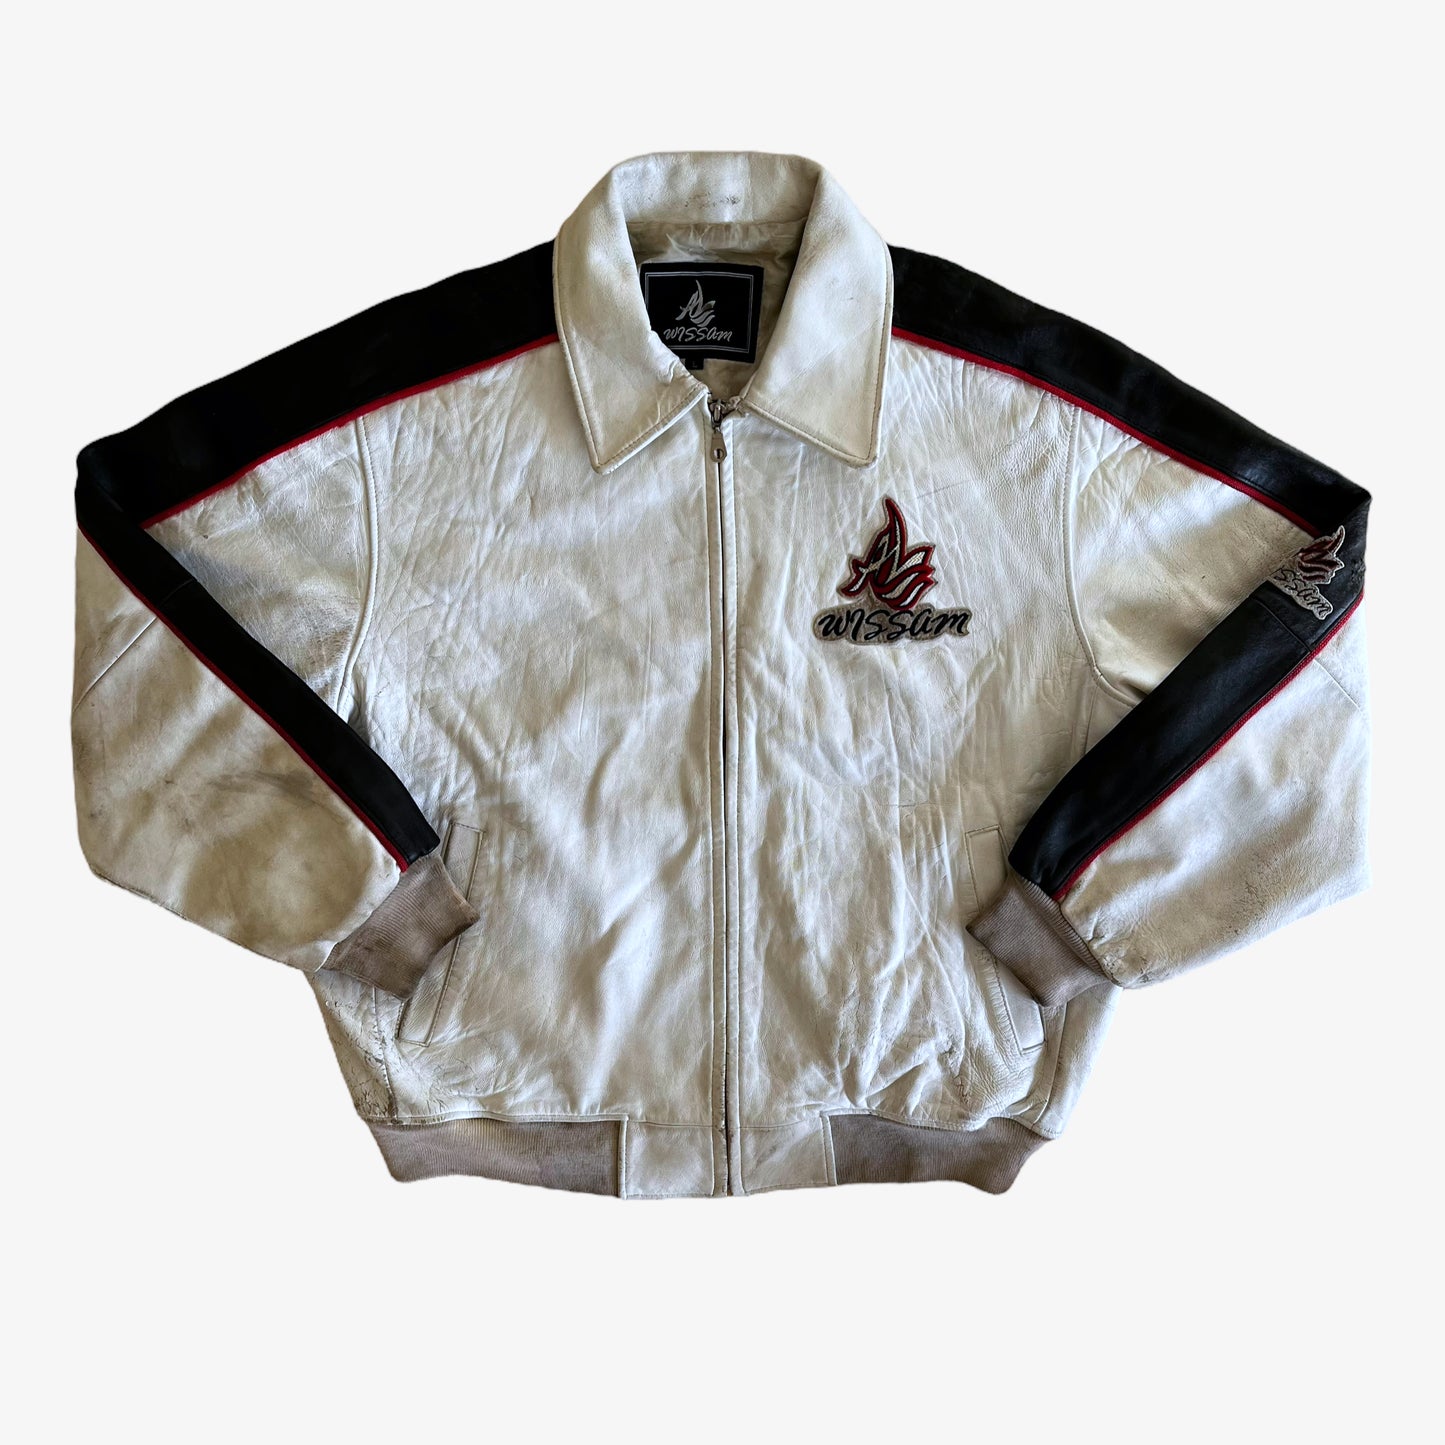 Vintage 90s AL Wissam White Leather Varsity Jacket With Back Spell Out - Casspios Dream